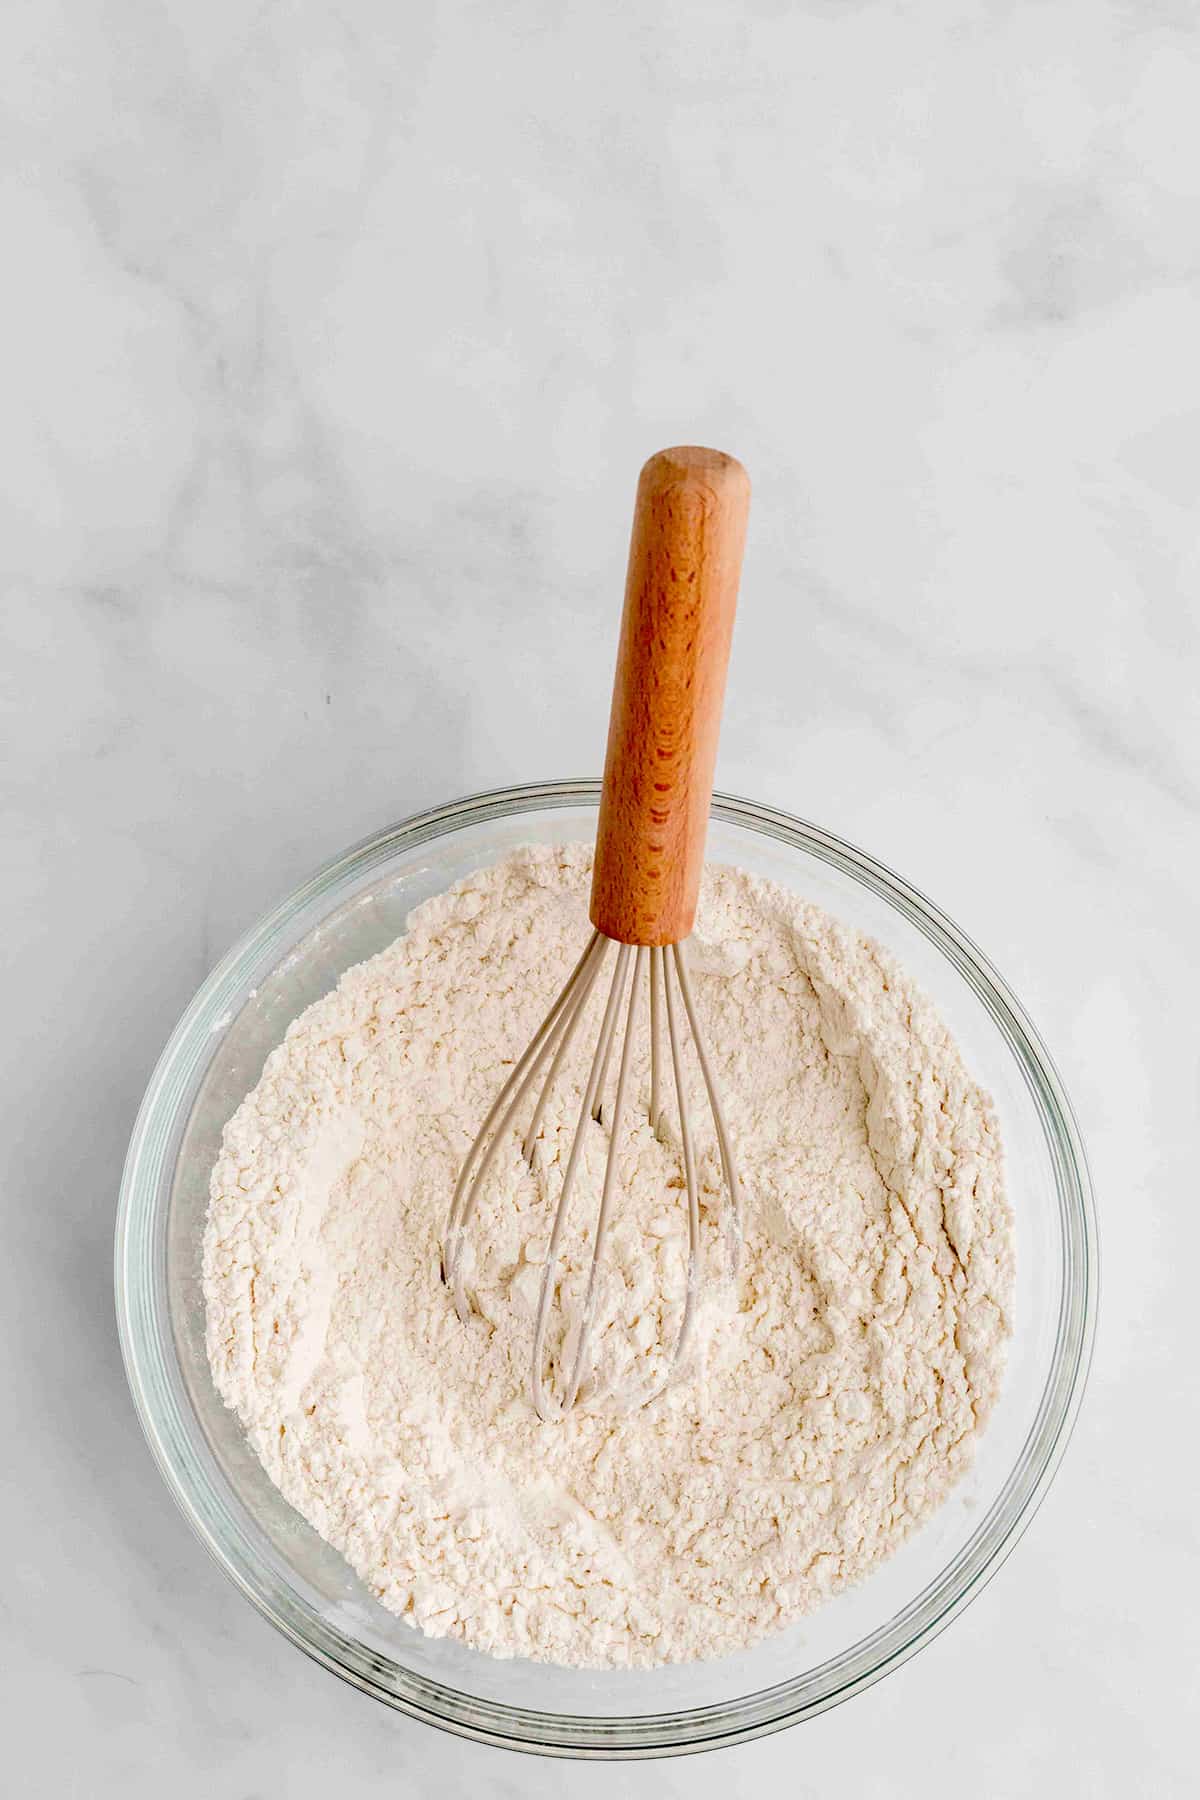 Mixing dry ingredients together with a whisk.